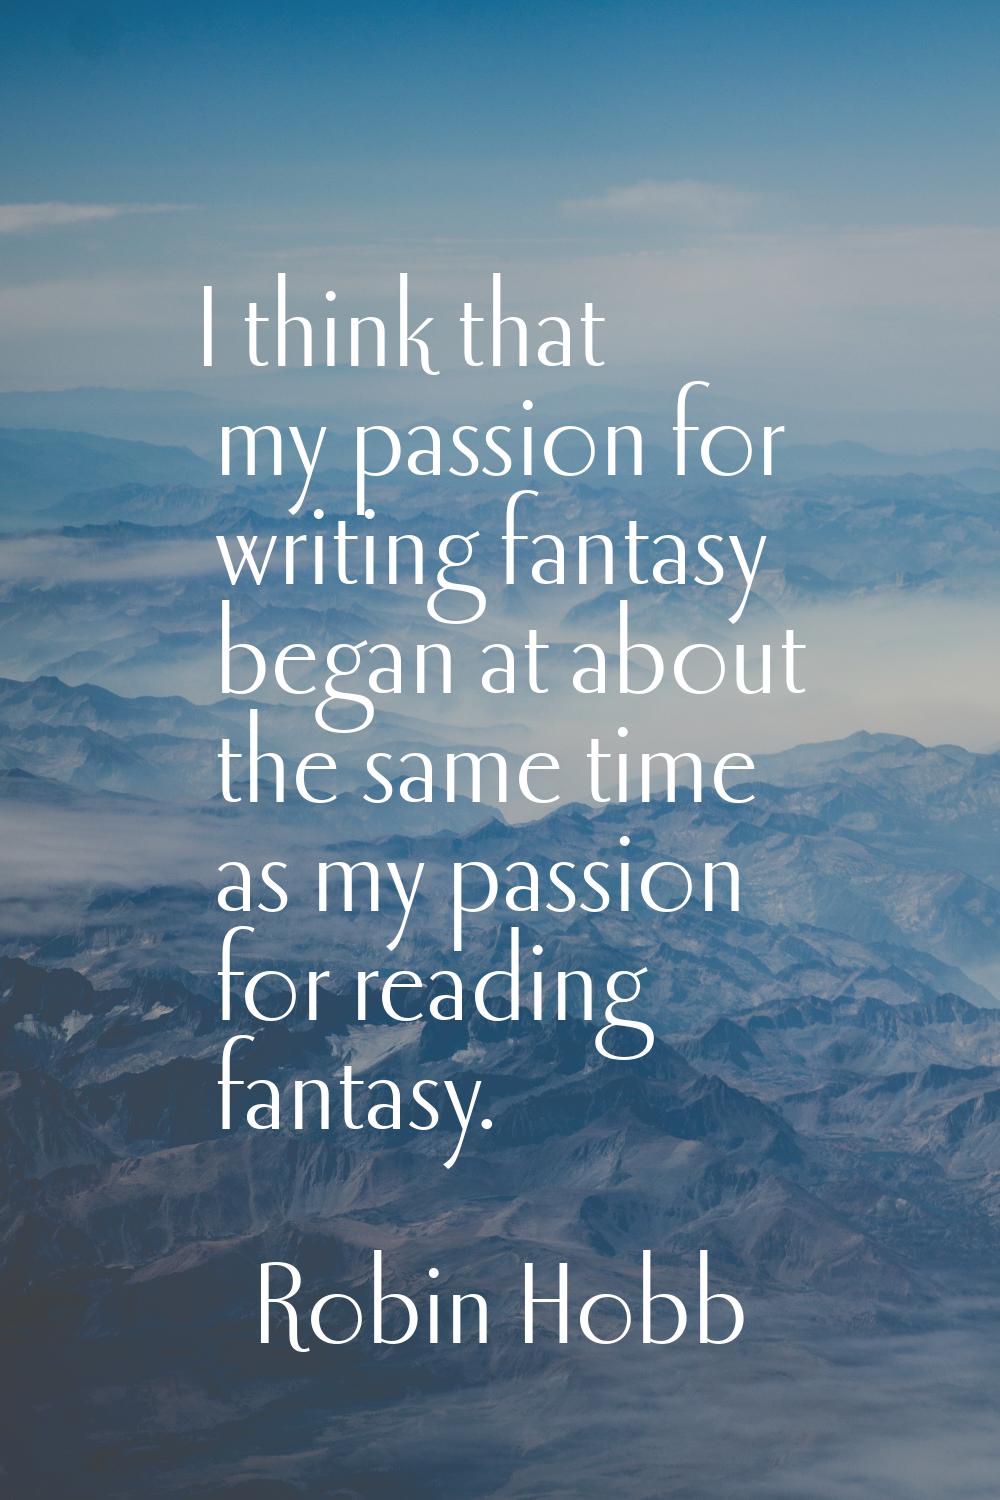 I think that my passion for writing fantasy began at about the same time as my passion for reading 